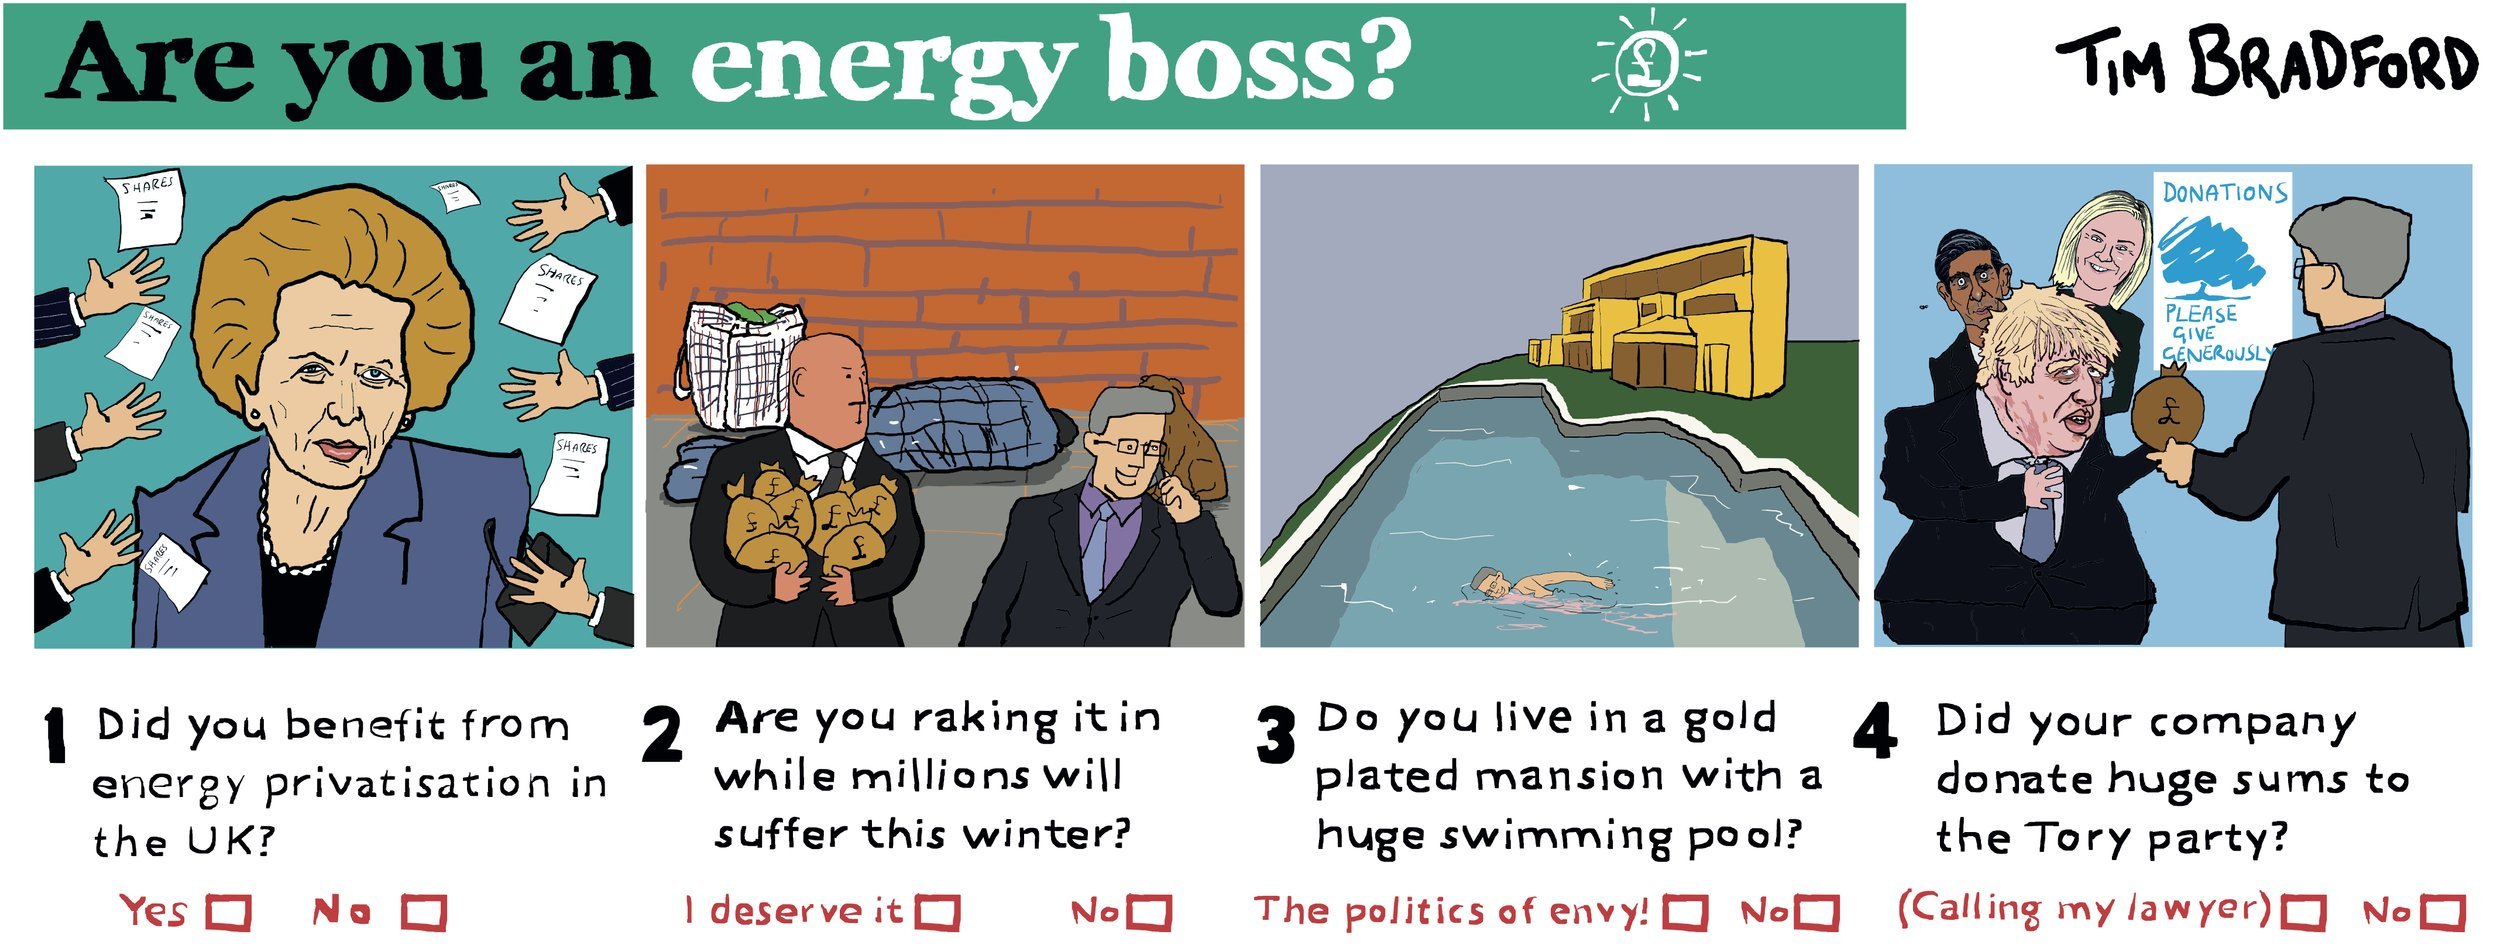 Are you an energy boss? - 15/08/2022